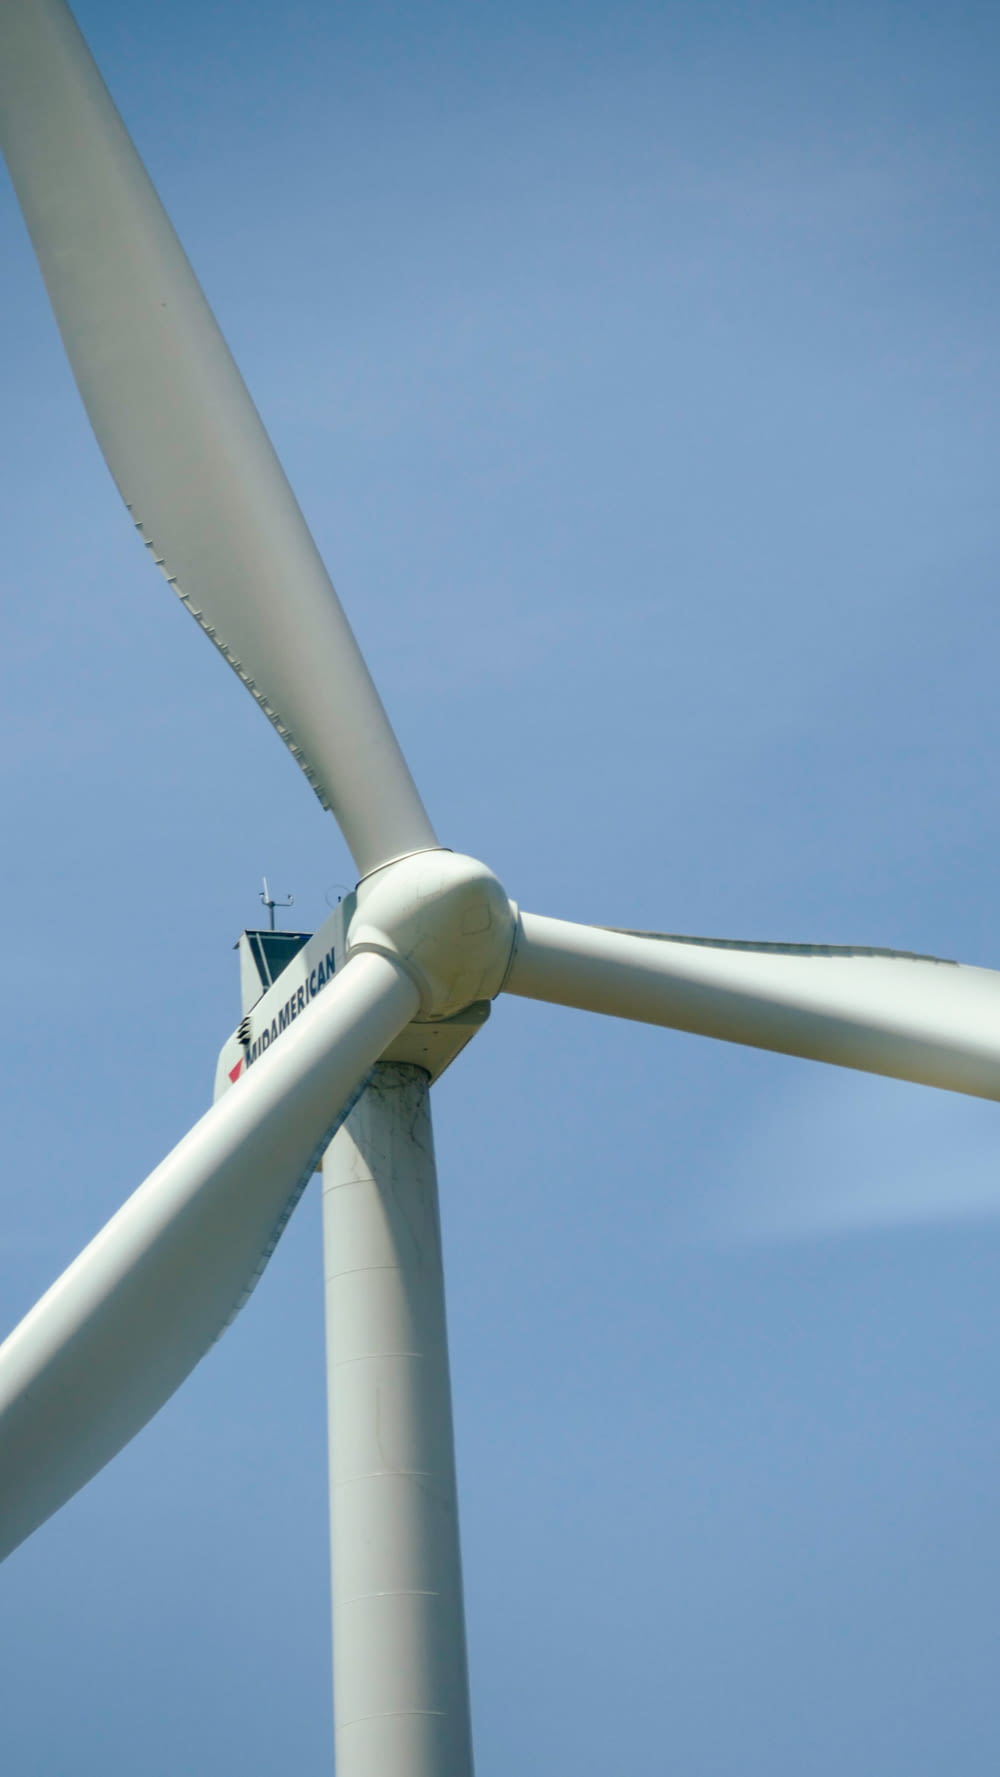 a close up of a wind turbine on a clear day